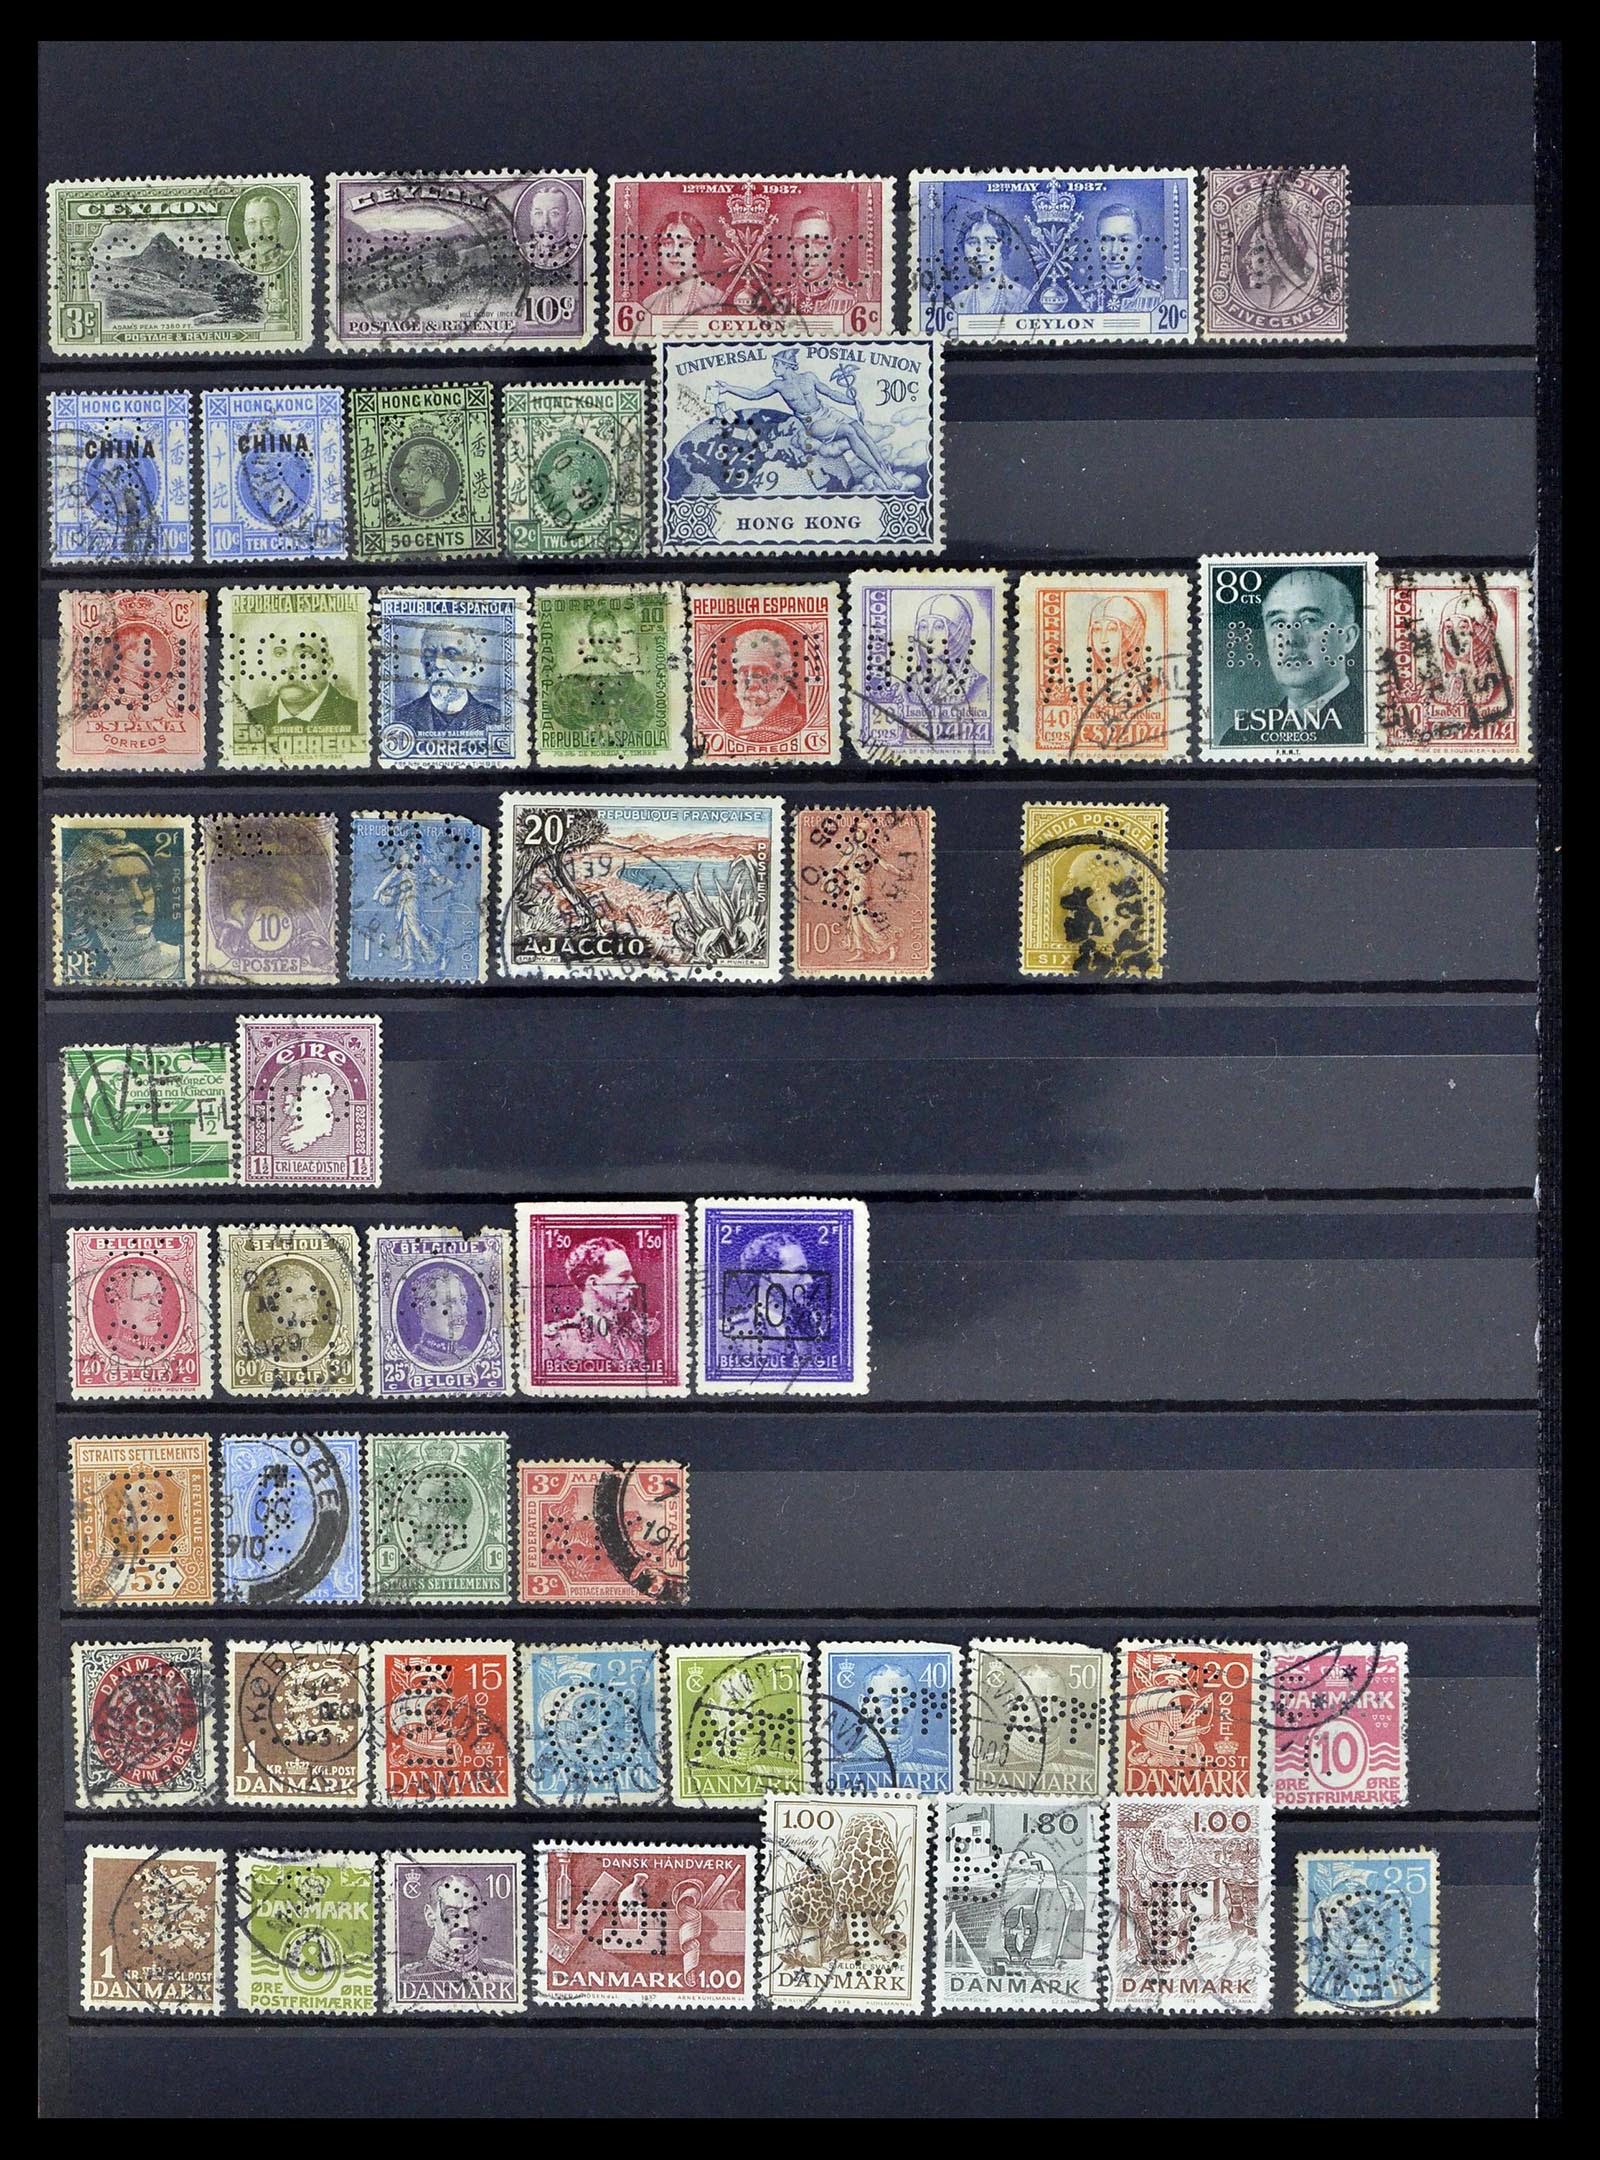 39196 0139 - Stamp collection 39196 Great Britain 1844-1955.